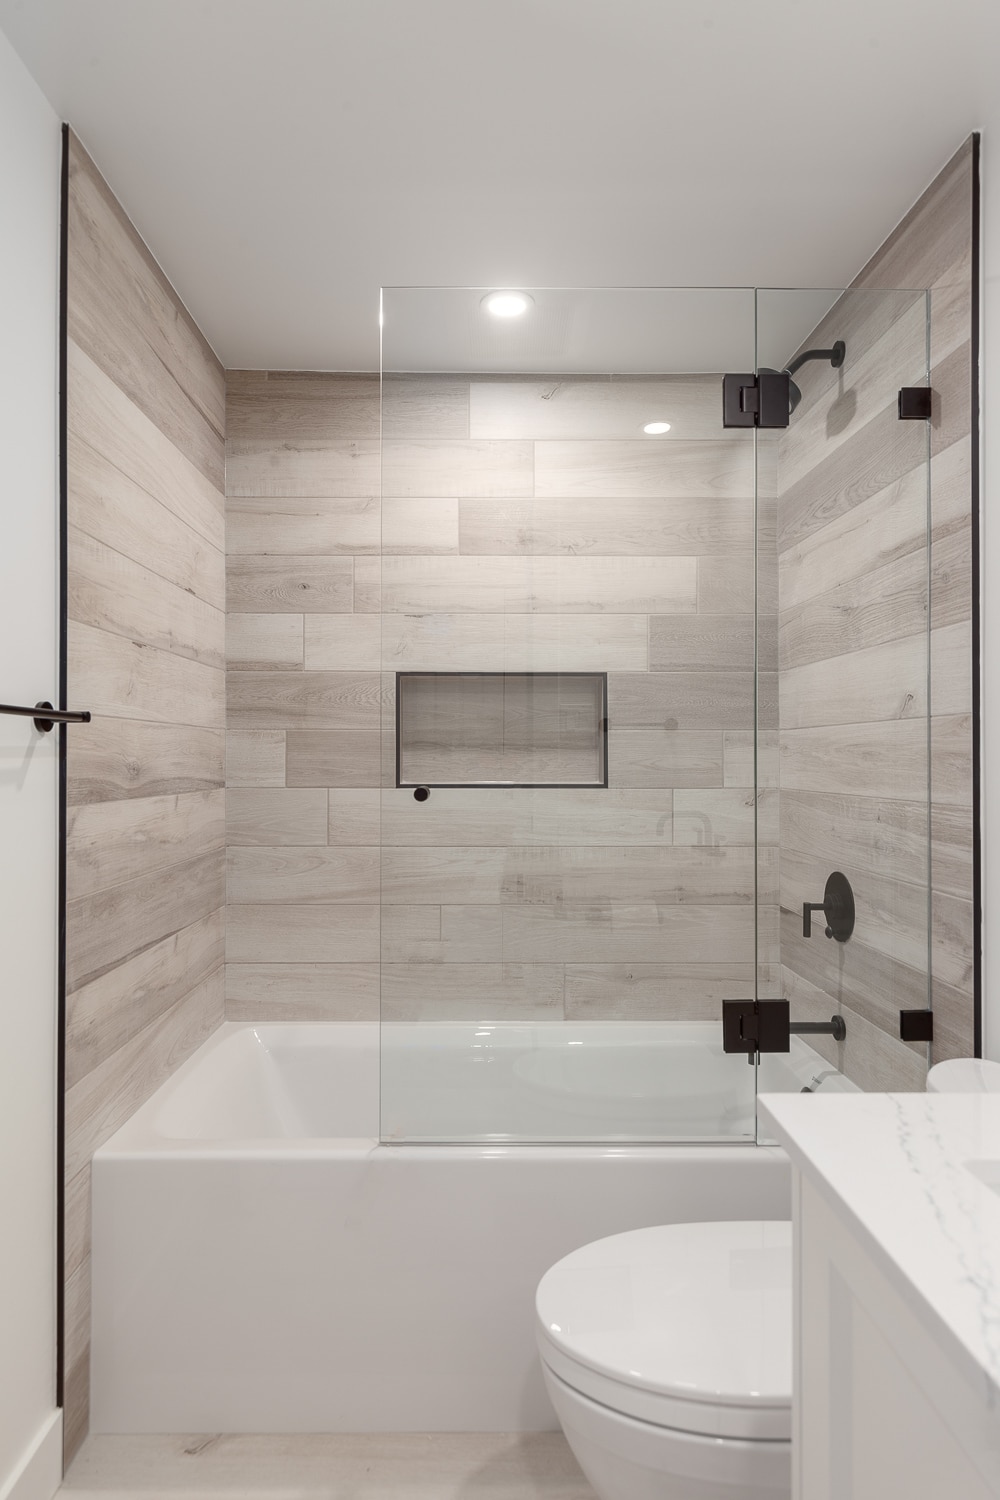 Vancouver Bathroom Gallery - Canadian Home Style